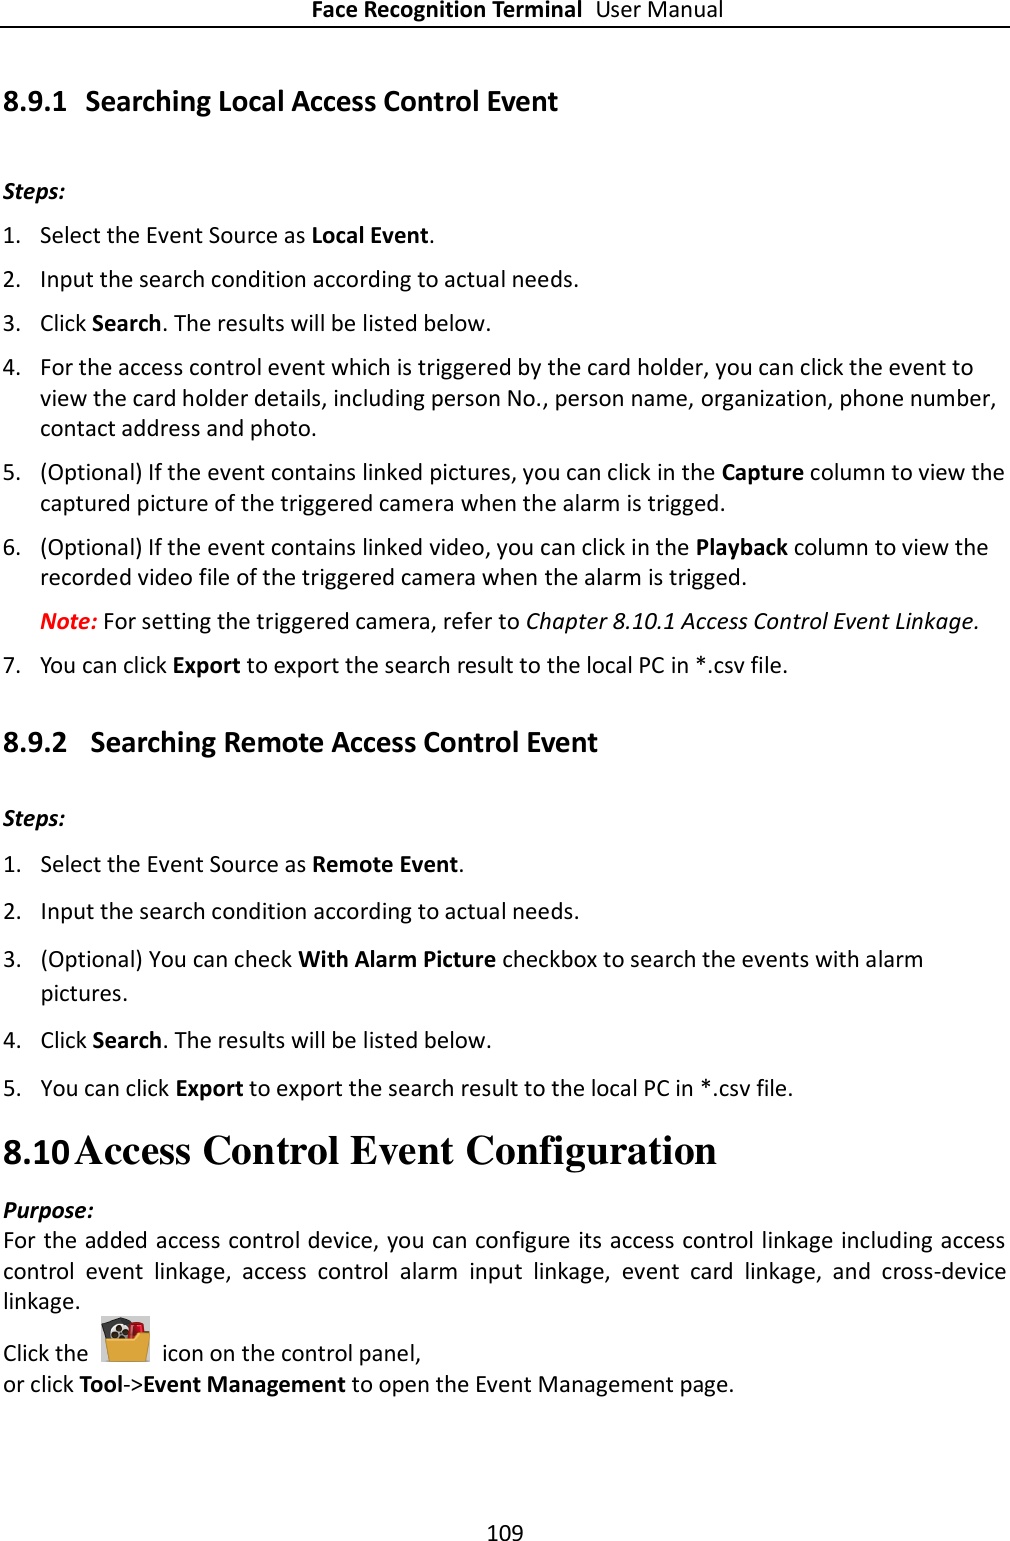 Face Recognition Terminal User Manual 109  8.9.1 Searching Local Access Control Event Steps: 1. Select the Event Source as Local Event. 2. Input the search condition according to actual needs. 3. Click Search. The results will be listed below. 4. For the access control event which is triggered by the card holder, you can click the event to view the card holder details, including person No., person name, organization, phone number, contact address and photo. 5. (Optional) If the event contains linked pictures, you can click in the Capture column to view the captured picture of the triggered camera when the alarm is trigged. 6. (Optional) If the event contains linked video, you can click in the Playback column to view the recorded video file of the triggered camera when the alarm is trigged. Note: For setting the triggered camera, refer to Chapter 8.10.1 Access Control Event Linkage. 7. You can click Export to export the search result to the local PC in *.csv file. 8.9.2 Searching Remote Access Control Event Steps: 1. Select the Event Source as Remote Event. 2. Input the search condition according to actual needs. 3. (Optional) You can check With Alarm Picture checkbox to search the events with alarm pictures. 4. Click Search. The results will be listed below. 5. You can click Export to export the search result to the local PC in *.csv file. 8.10 Access Control Event Configuration Purpose: For the added access control device, you can configure its access control linkage including access control  event  linkage,  access  control  alarm  input  linkage,  event  card  linkage,  and  cross-device linkage. Click the    icon on the control panel, or click Tool-&gt;Event Management to open the Event Management page. 